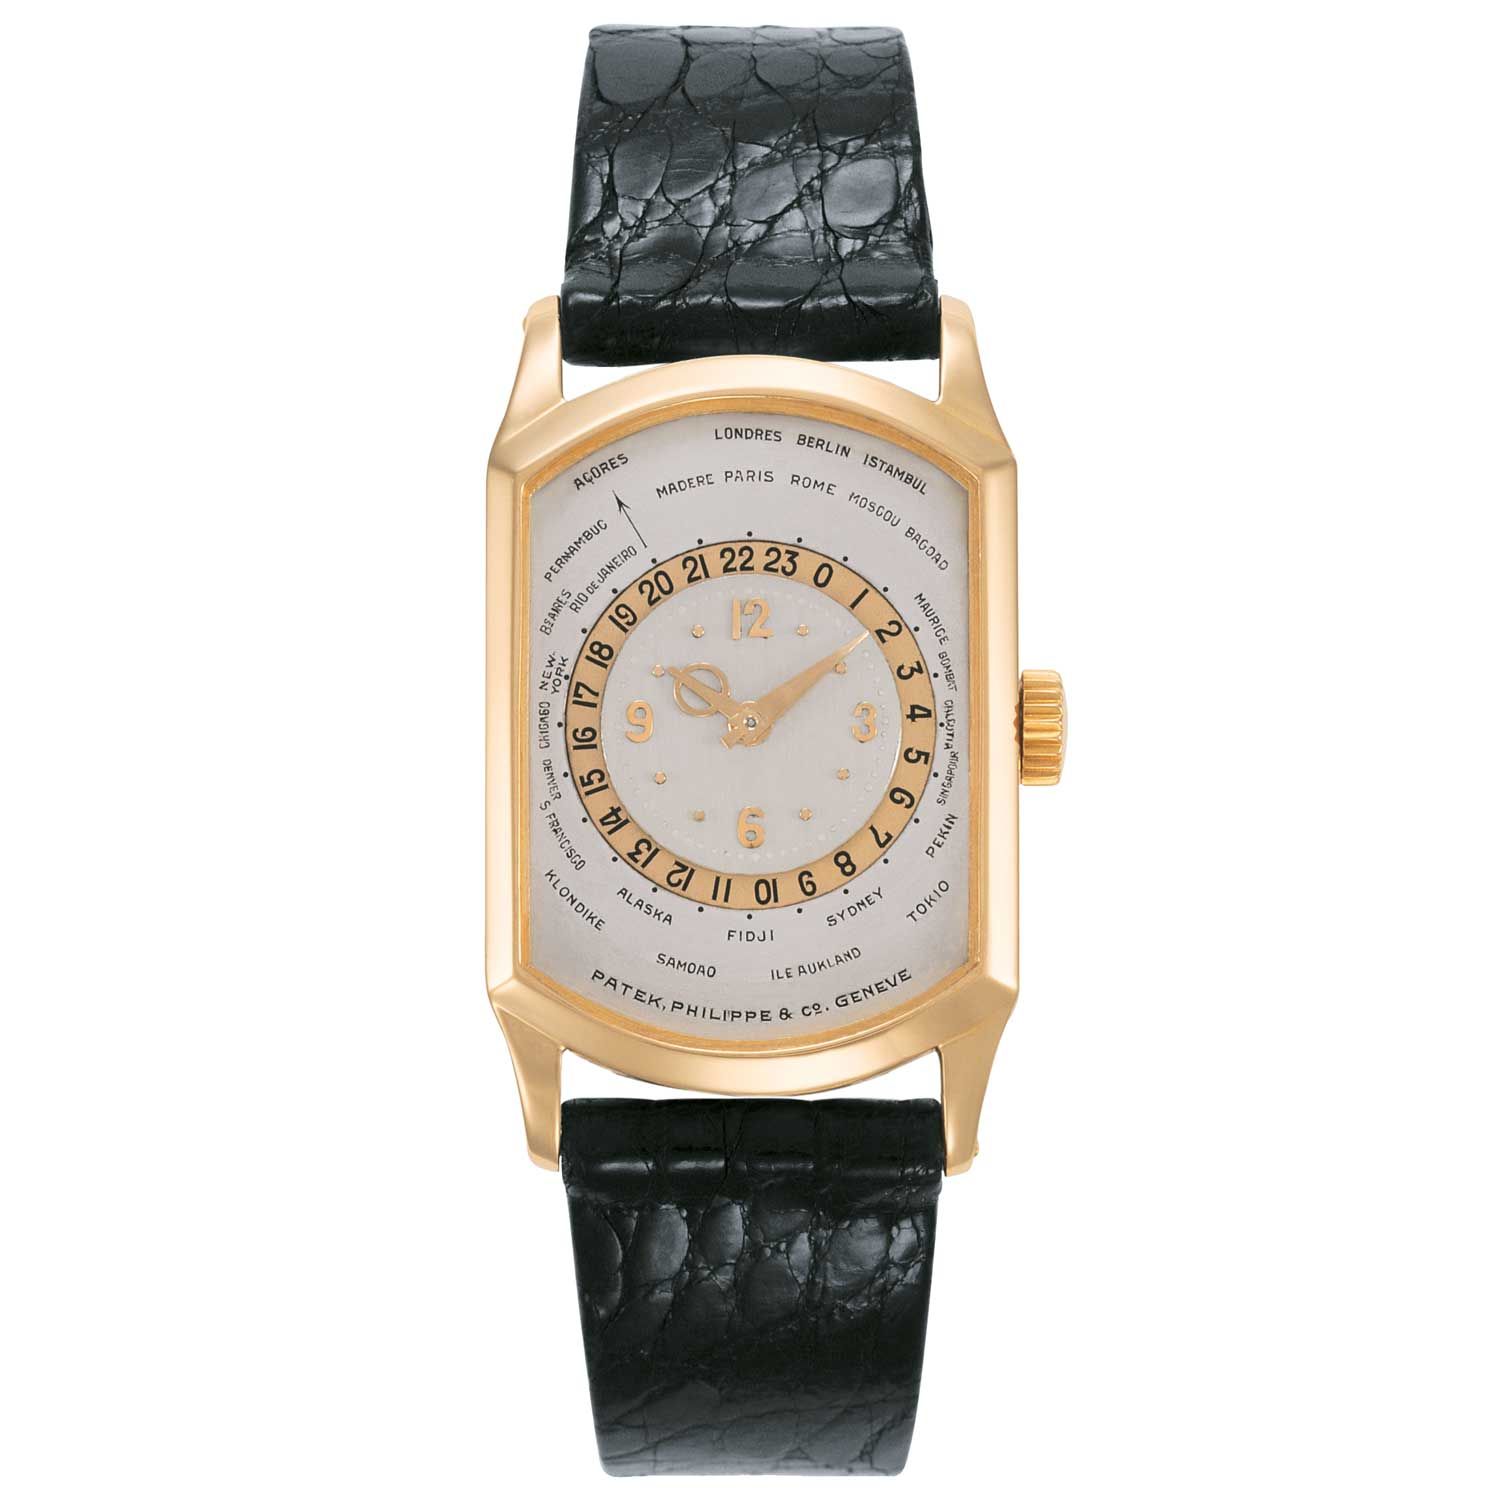 Made in 1937,the Patek Philippe ref. 515HU features a surprising and super elegant rose gold shaped rectangular case.